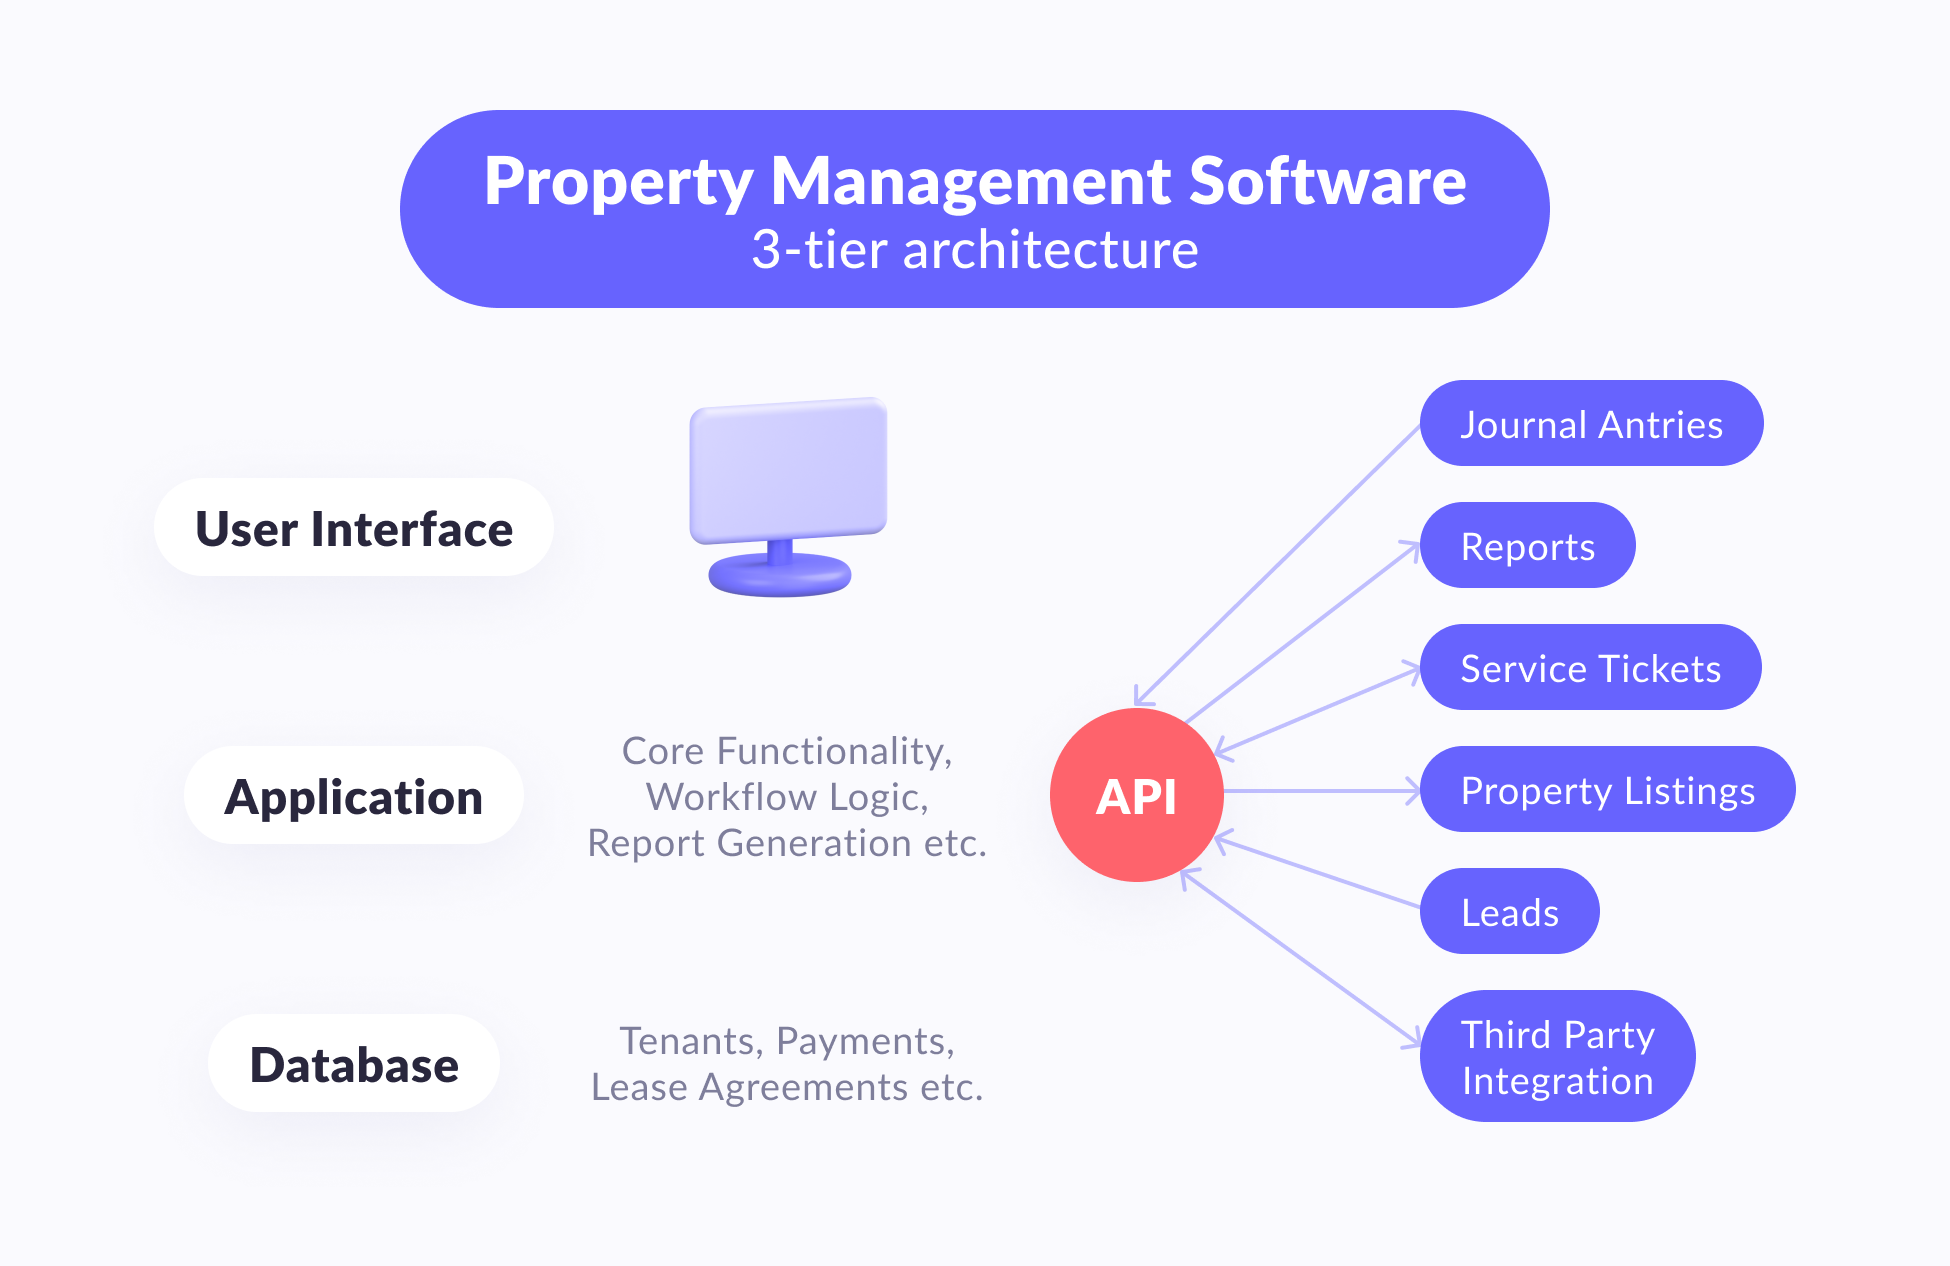 Property management software 3-tier architecture